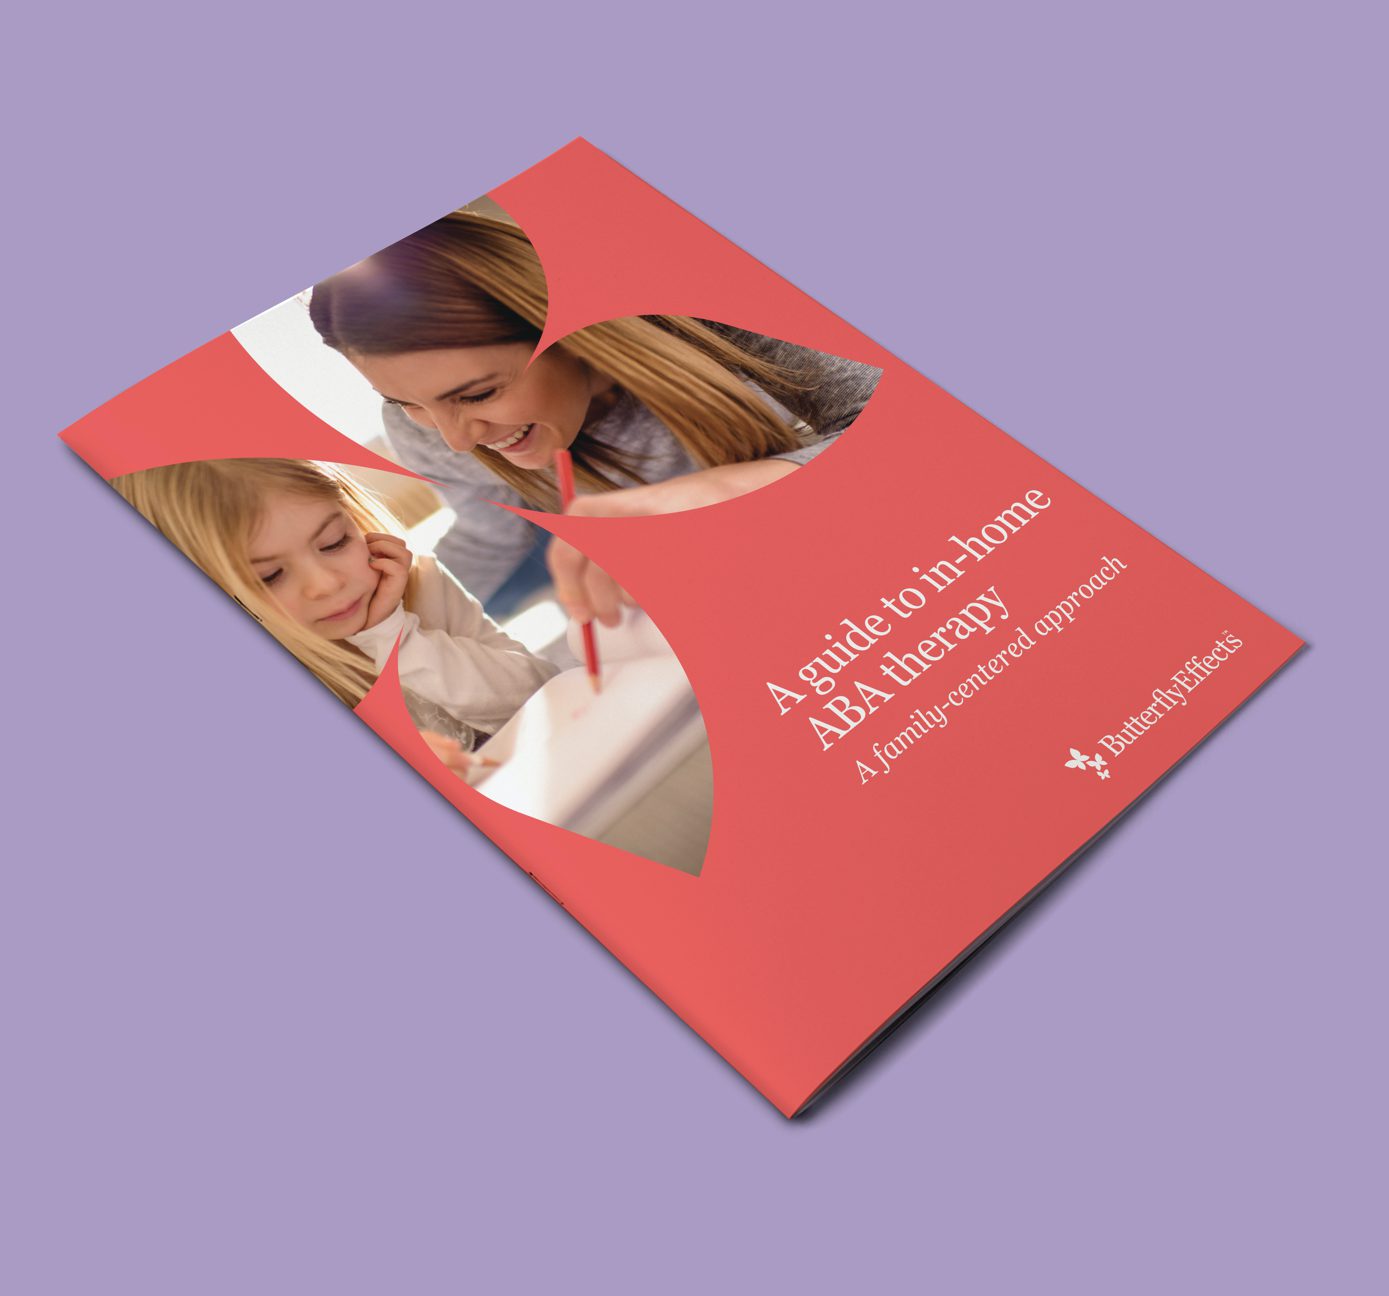 red booklet titled A Guide to in-home ABA therapy on a purple background